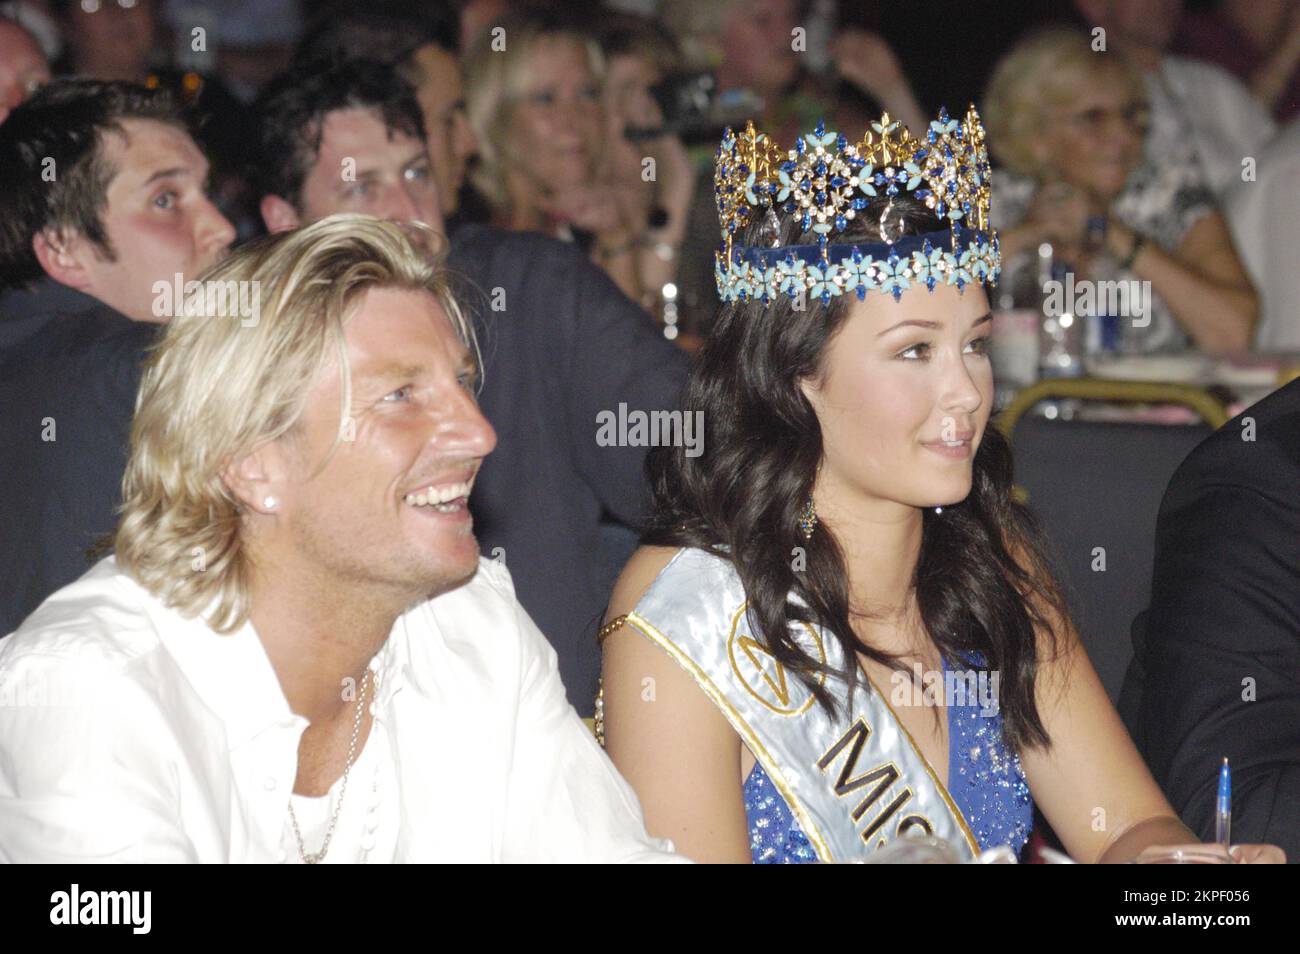 Miss Wales 2006 contest at the Coal Exchange in Cardiff, June 9 2006. Photograph: ROB WATKINS  Pictured: Judges footballer Robbie Savage with the reigning Miss World 2005 (Miss Iceland) Unnur Birna Vilhjalmsdottir Stock Photo